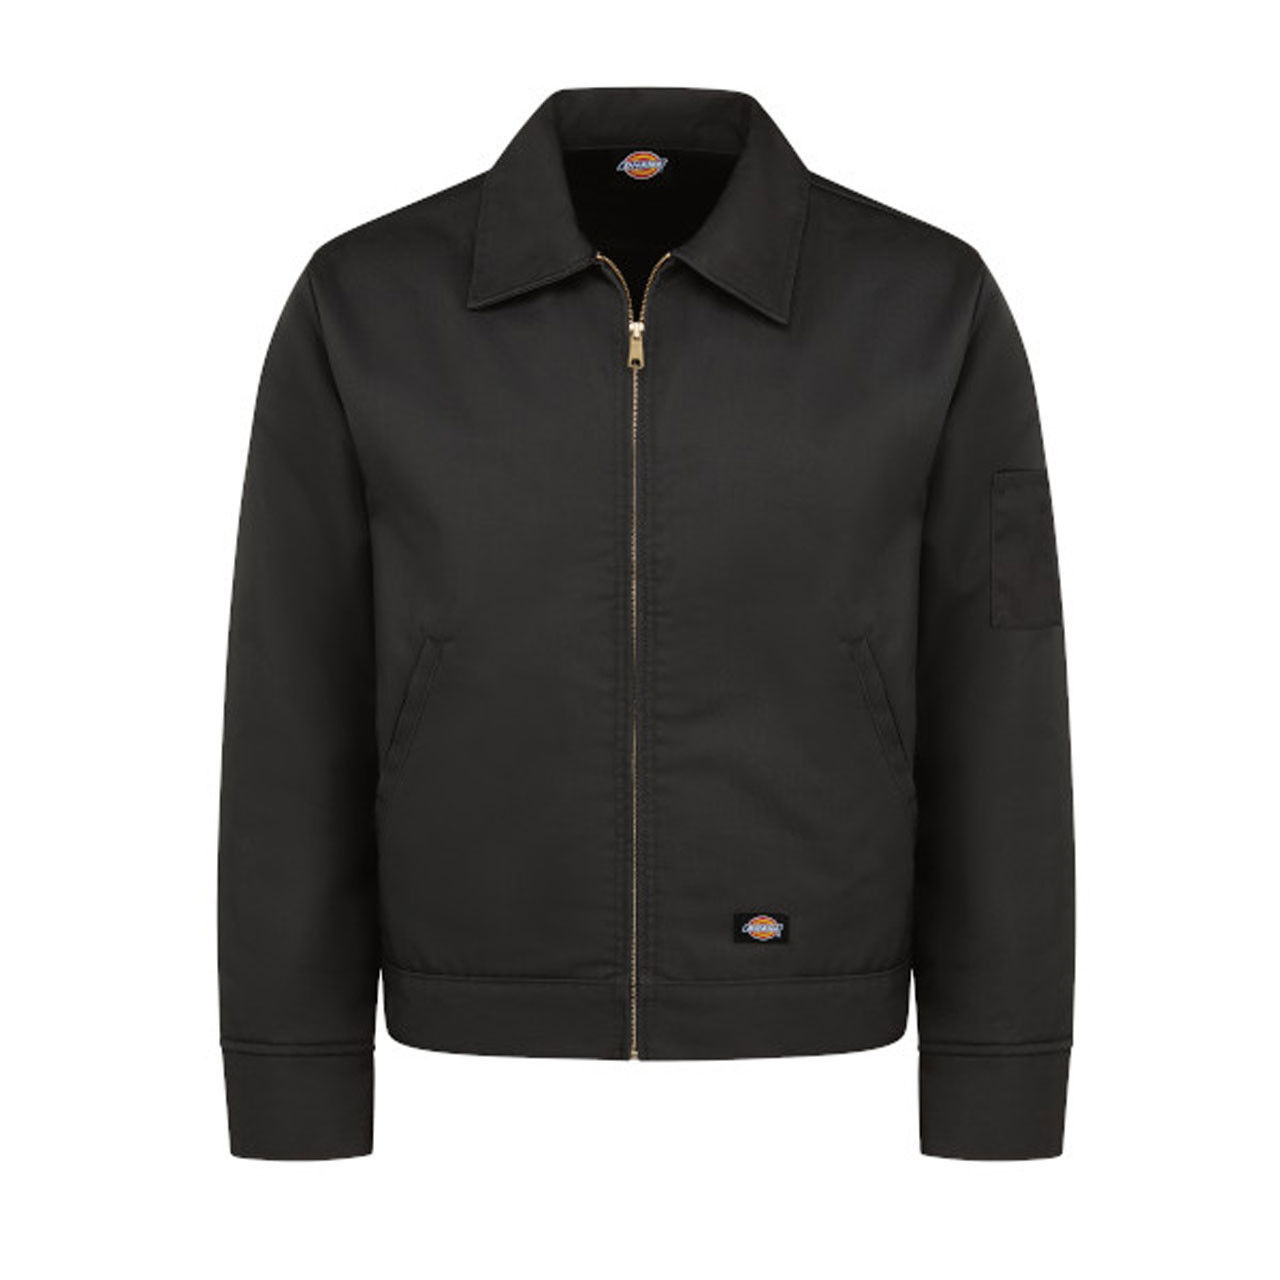 What type of zipper does the black Dickies jacket have?